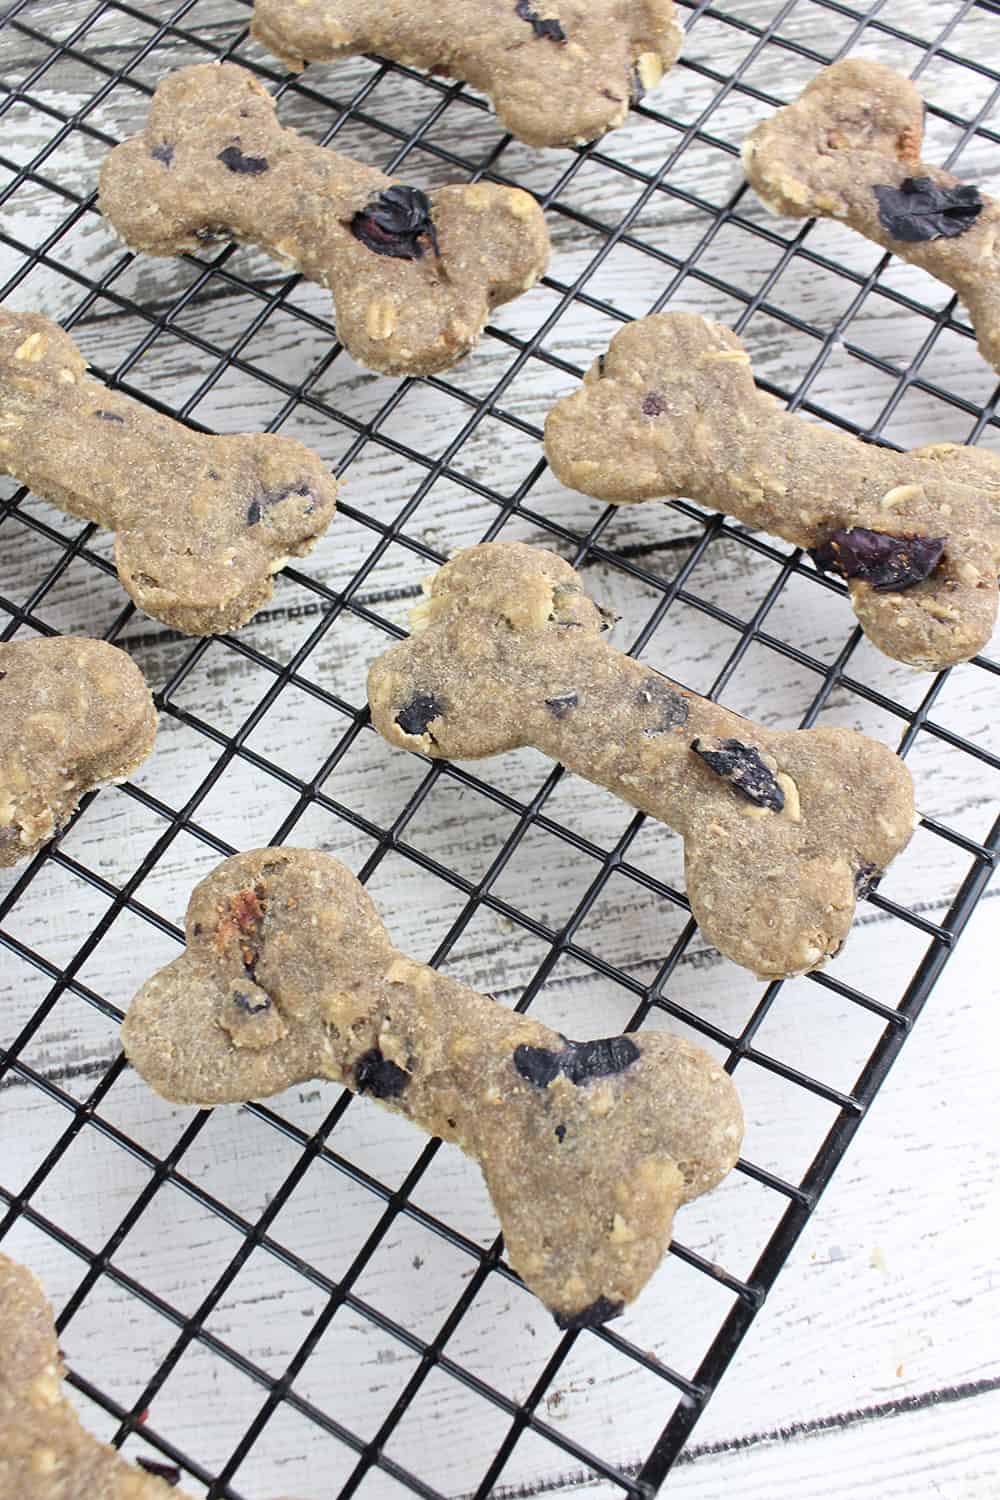 These Peanut Butter Banana Dog Treats are great for spoiling your pooch.